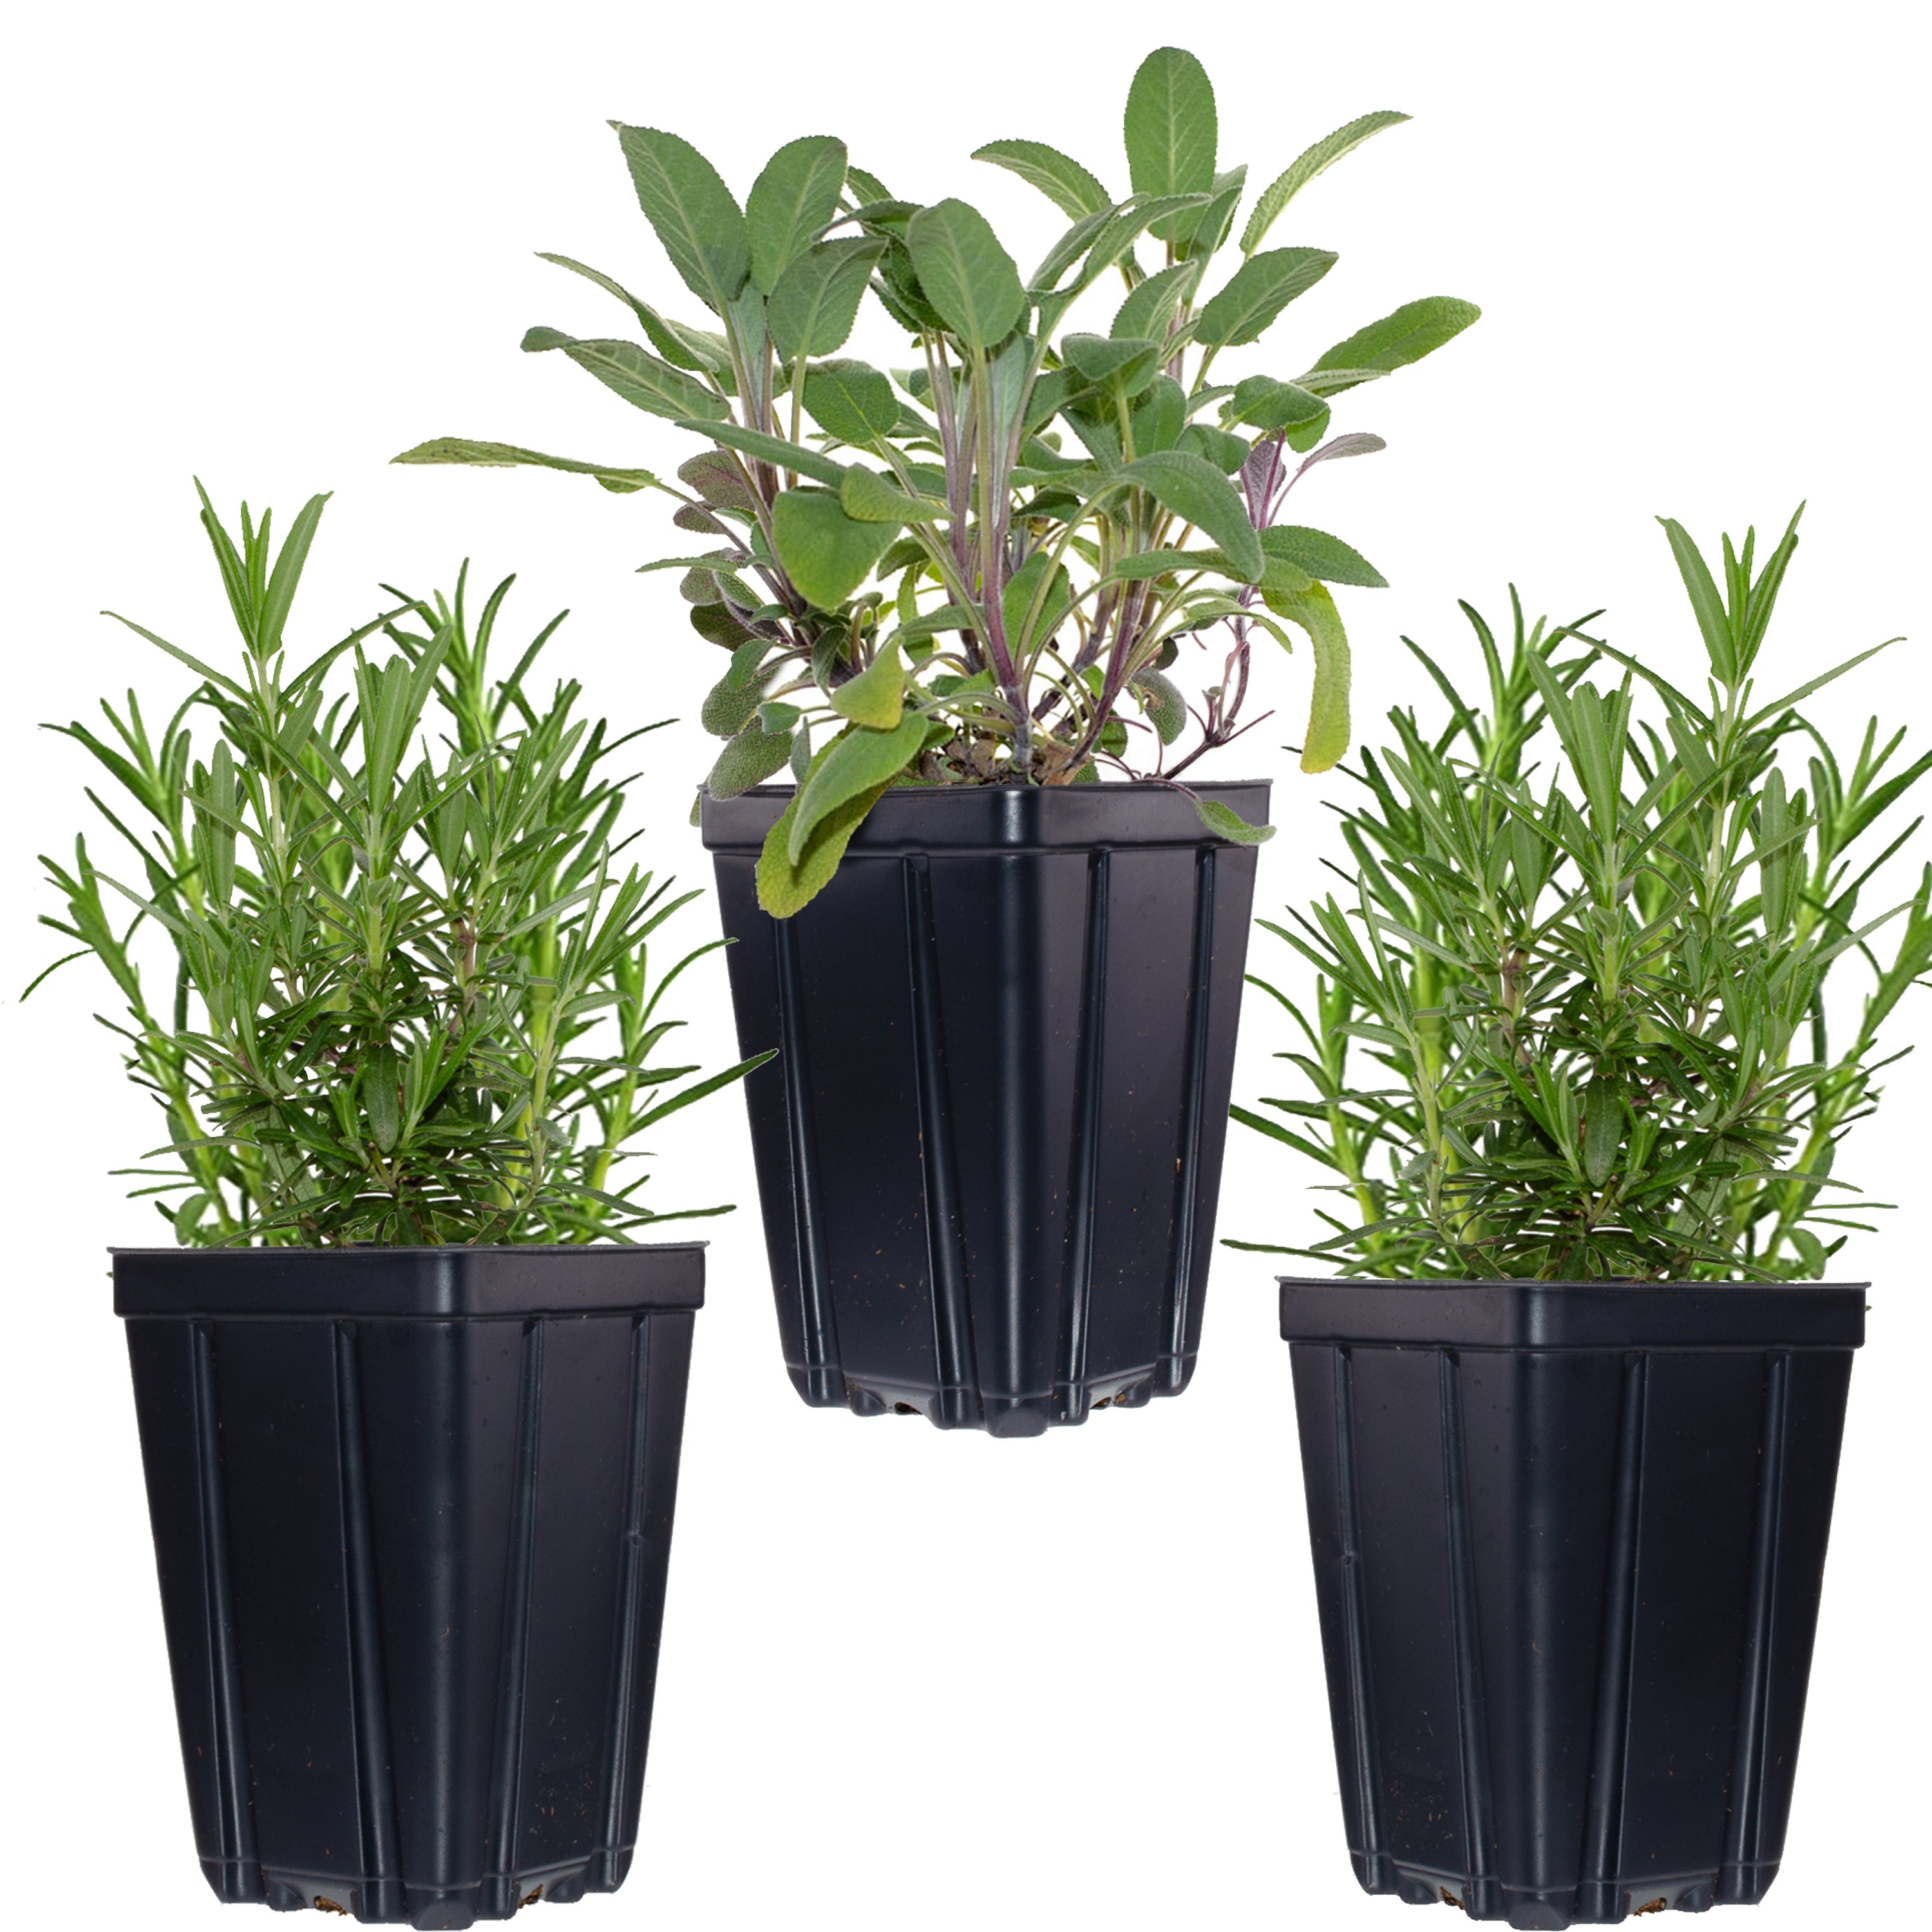 Kitchen Herb Collection Rosemary Oregano Thyme Quart Pots